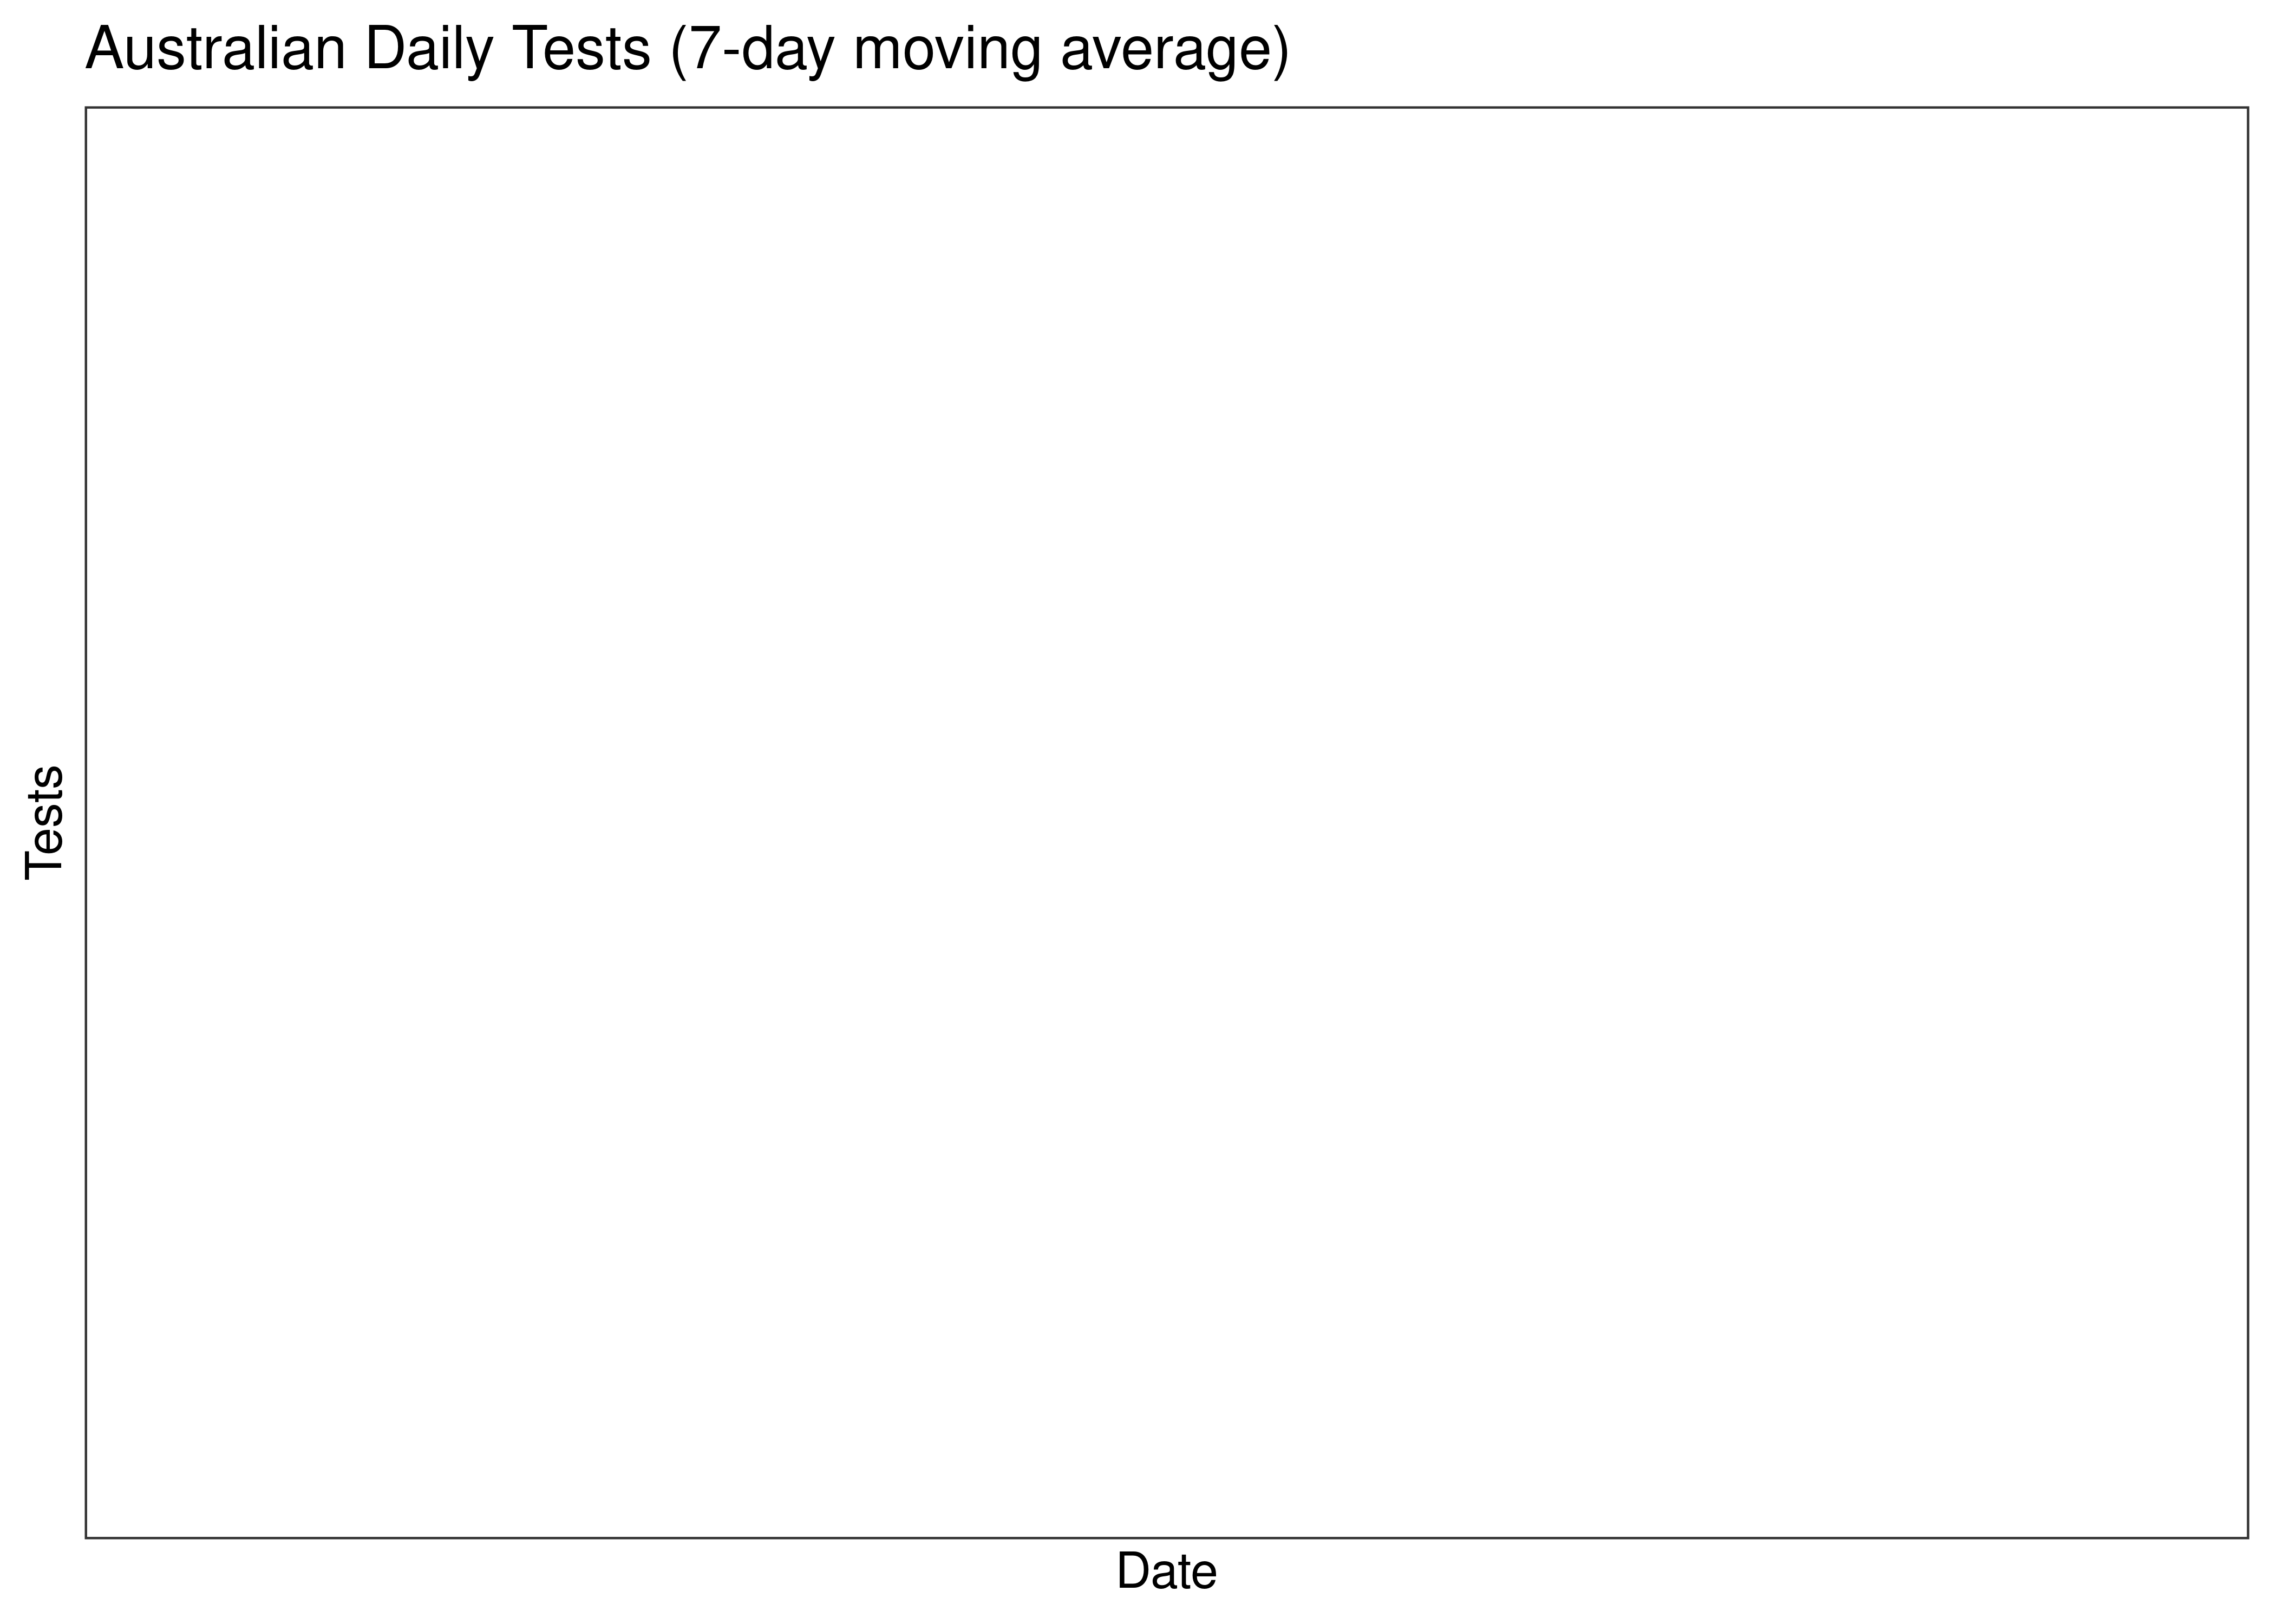 Australia - Daily Tests for Last 30 Days (7-day moving average)